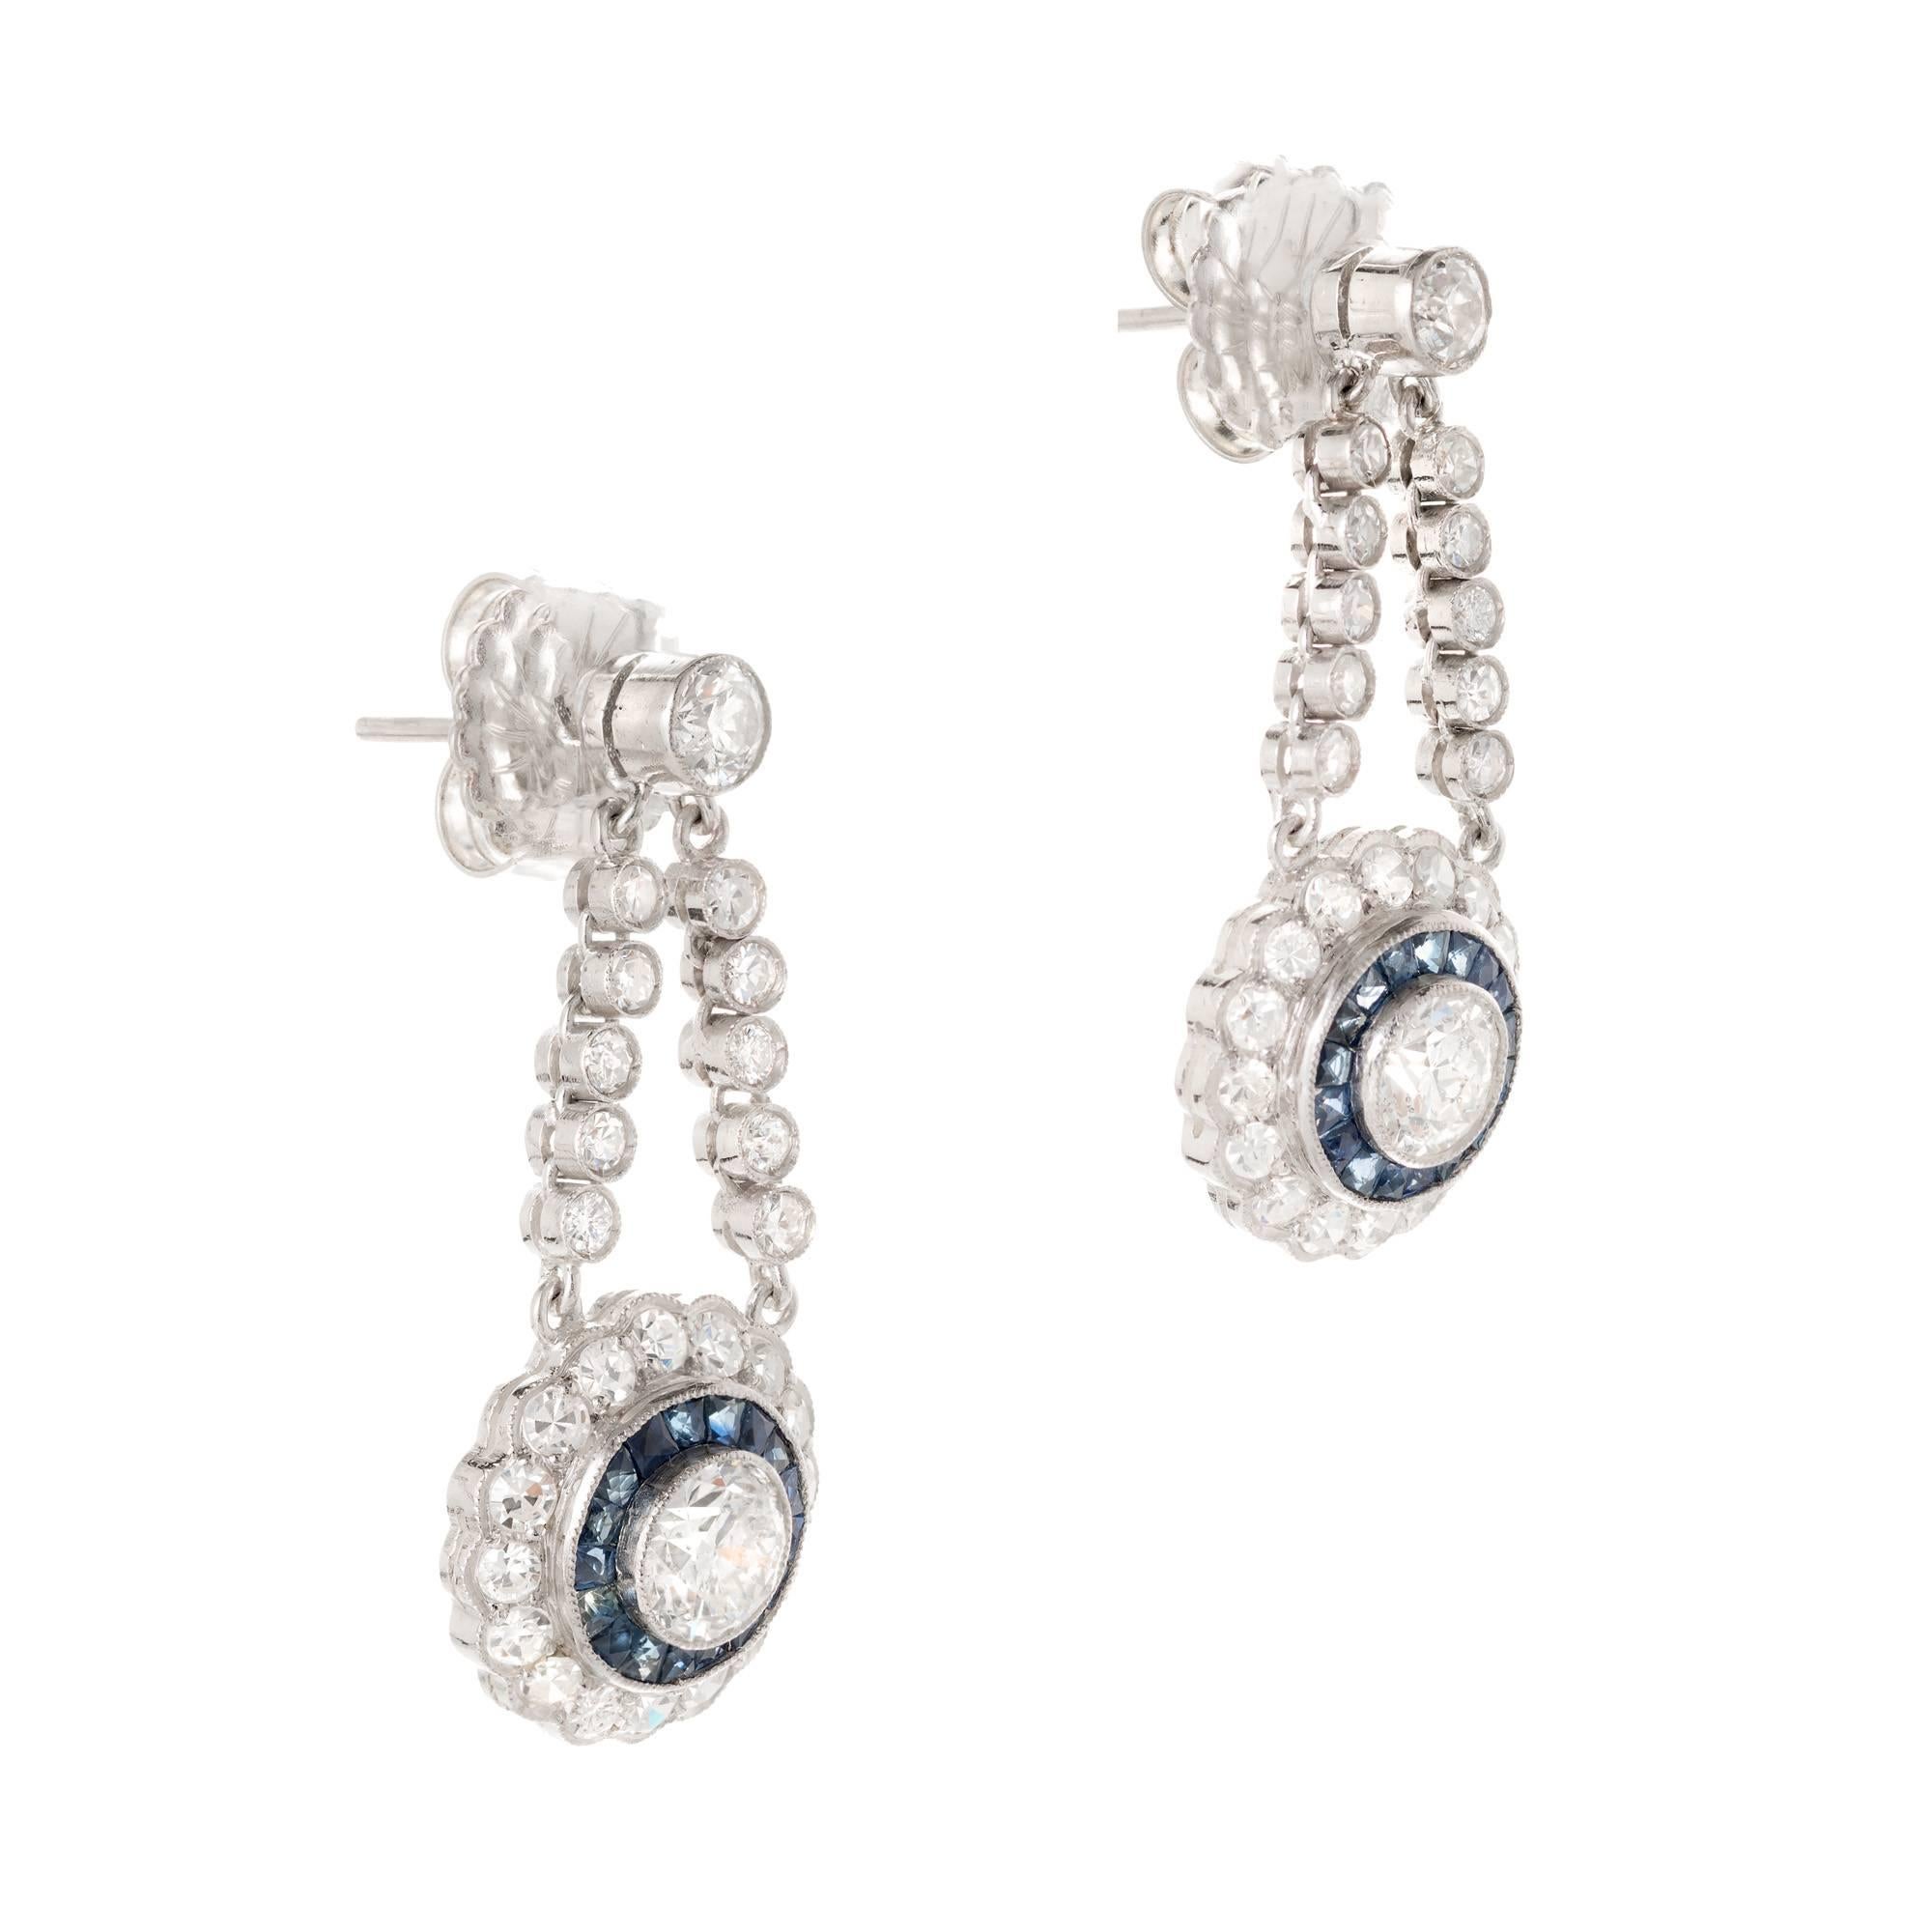 Vintage Art Deco platinum dangle earrings. Set with fine transitional cut bright white diamonds and French cut sapphires. Circa 1930

1 transitional round diamond F-G I approximate .72 carats. EGL Cert # US3141538015
1 transitional round diamond G-H